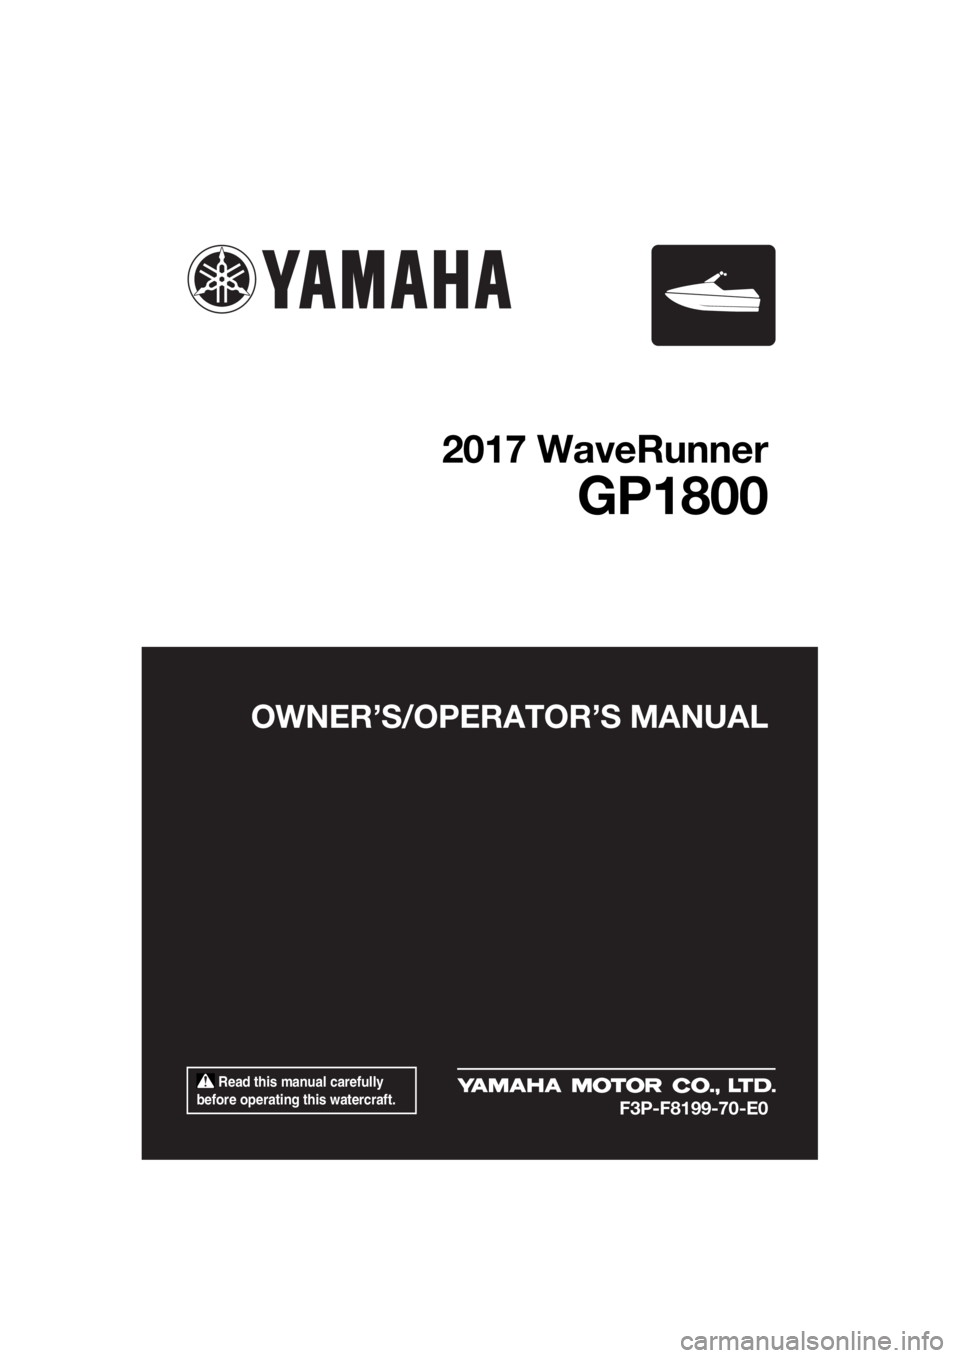 YAMAHA GP1800 2017  Owners Manual  Read this manual carefully 
before operating this watercraft.
OWNER’S/OPERATOR’S MANUAL
2017 WaveRunner
GP1800
F3P-F8199-70-E0
UF3P70E0.book  Page 1  Friday, September 2, 2016  11:32 AM 